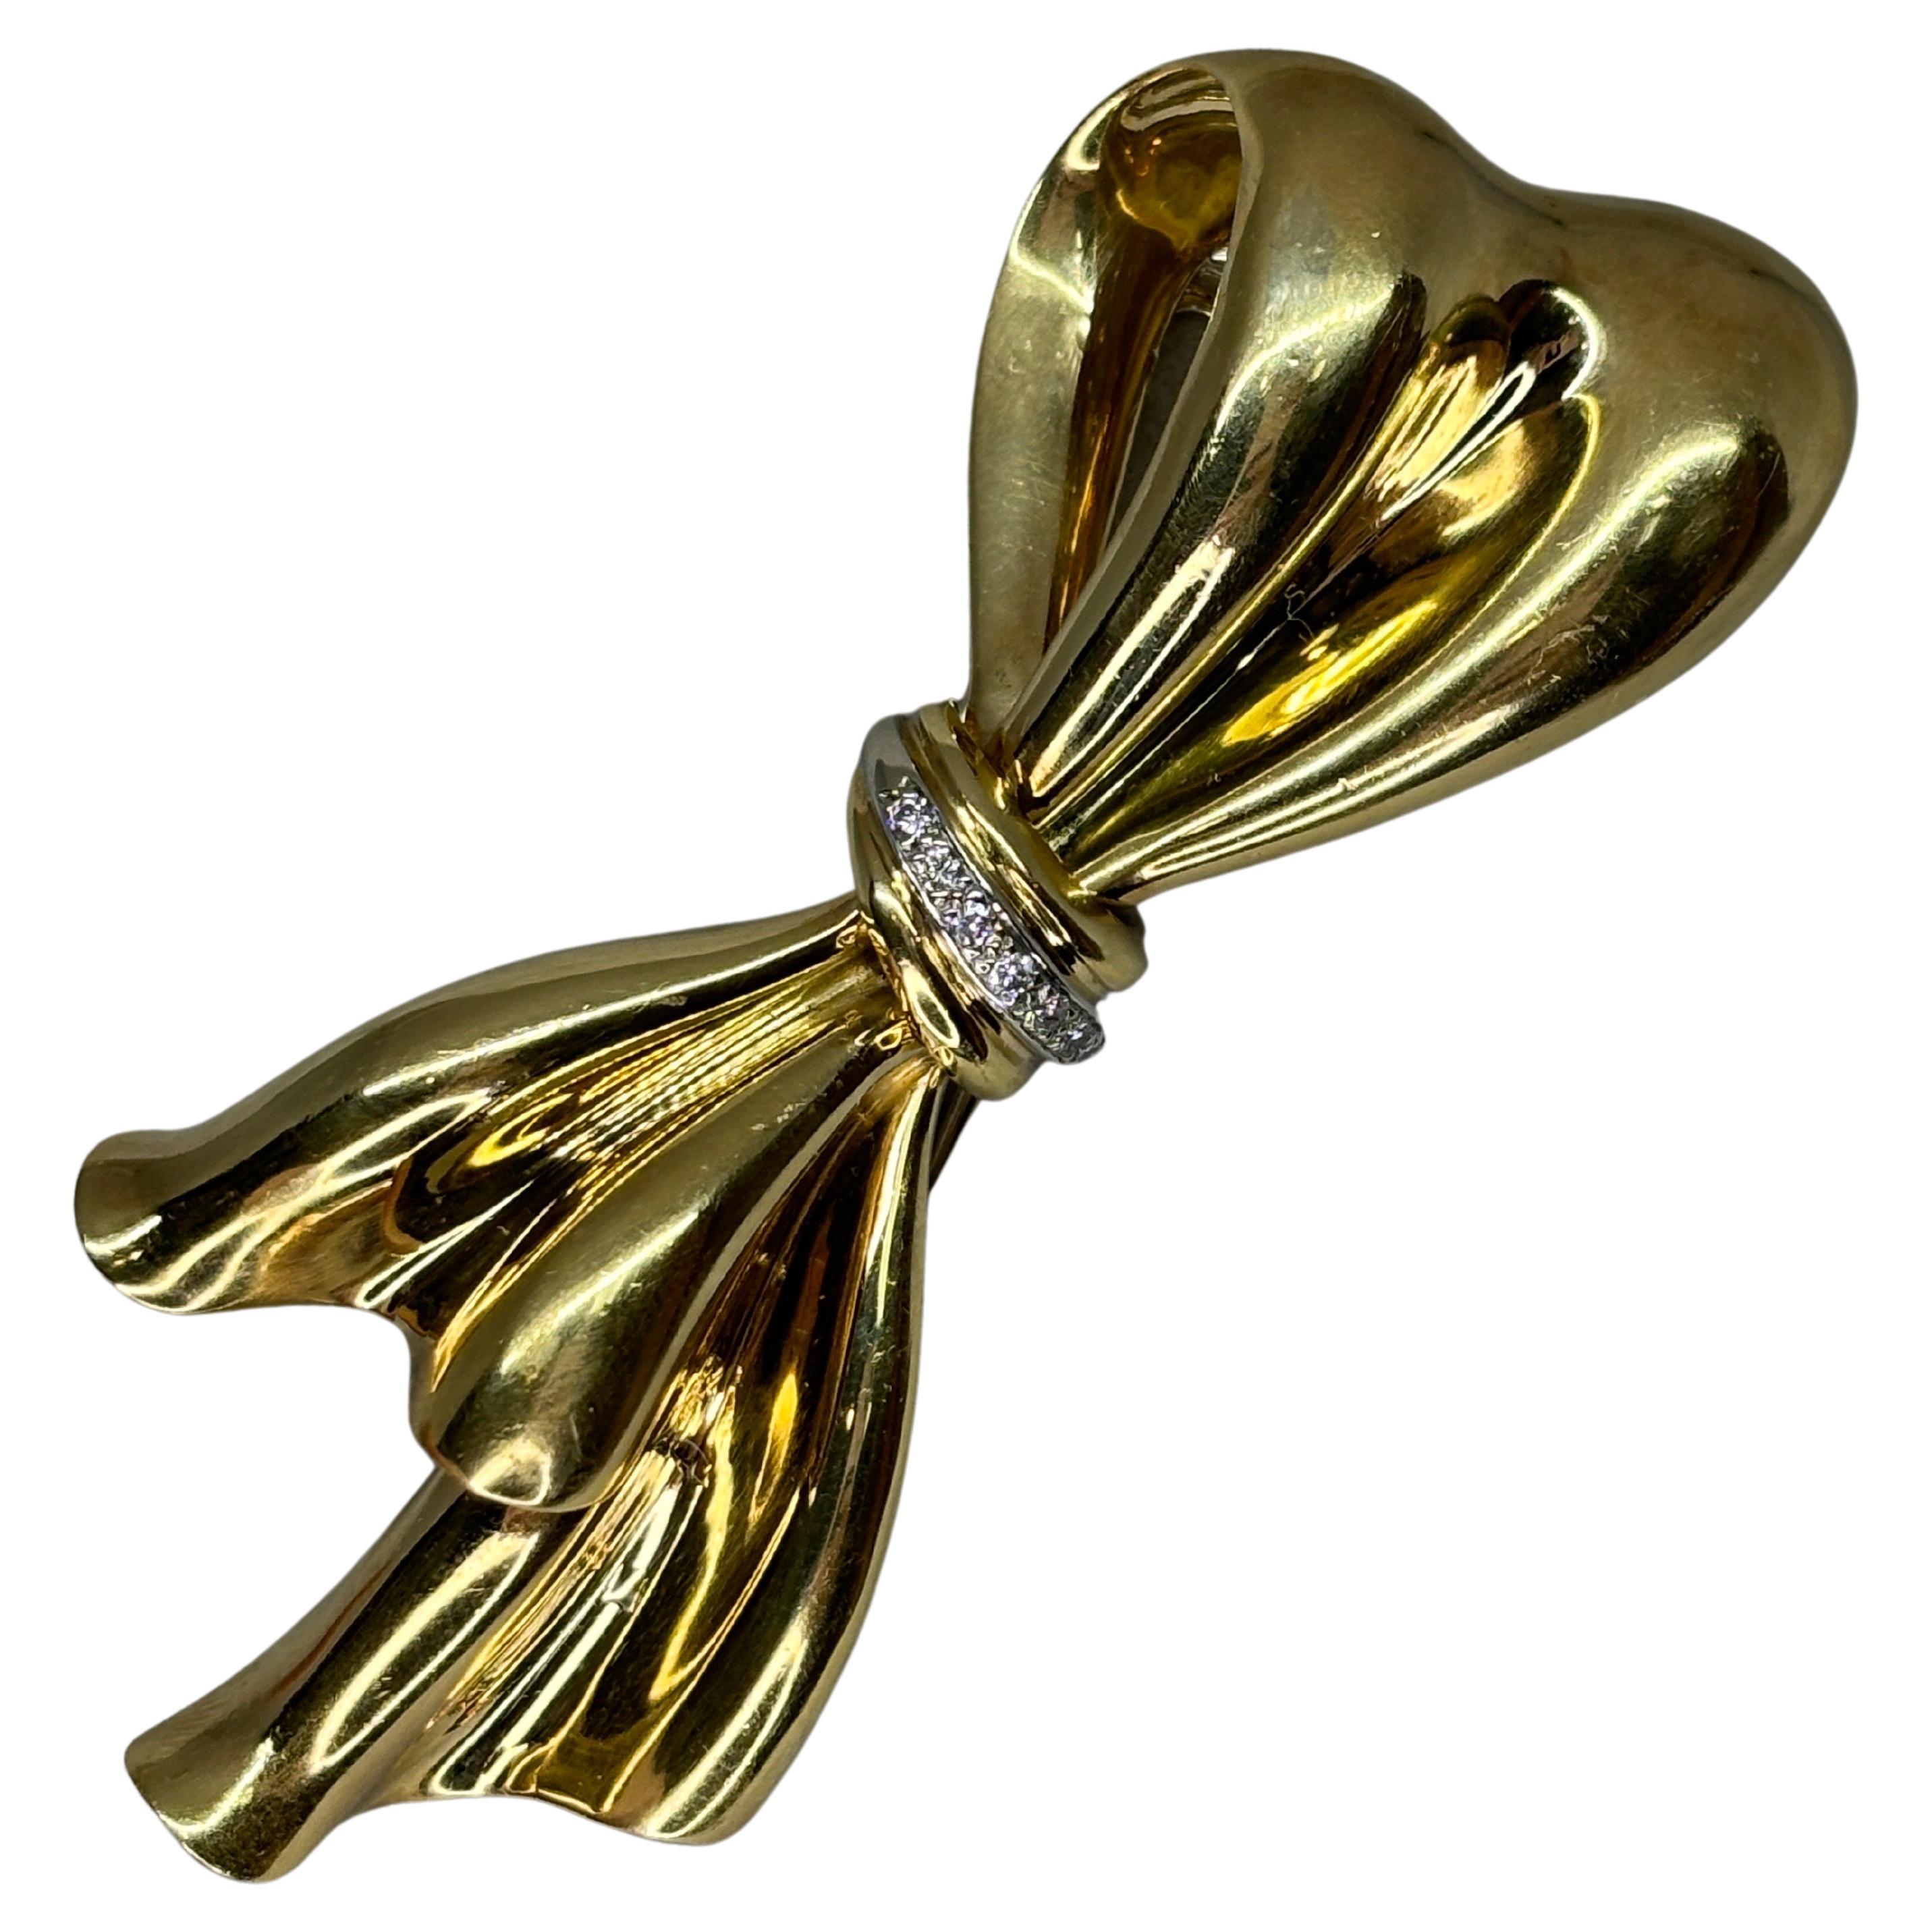 This beautiful 18k yellow gold diamond bow brooch showcases the beauty of fine materials and craftsmanship. Its timeless design, combined with the intrinsic value of high polished gold and diamonds, makes it a cherished item for any jewelry